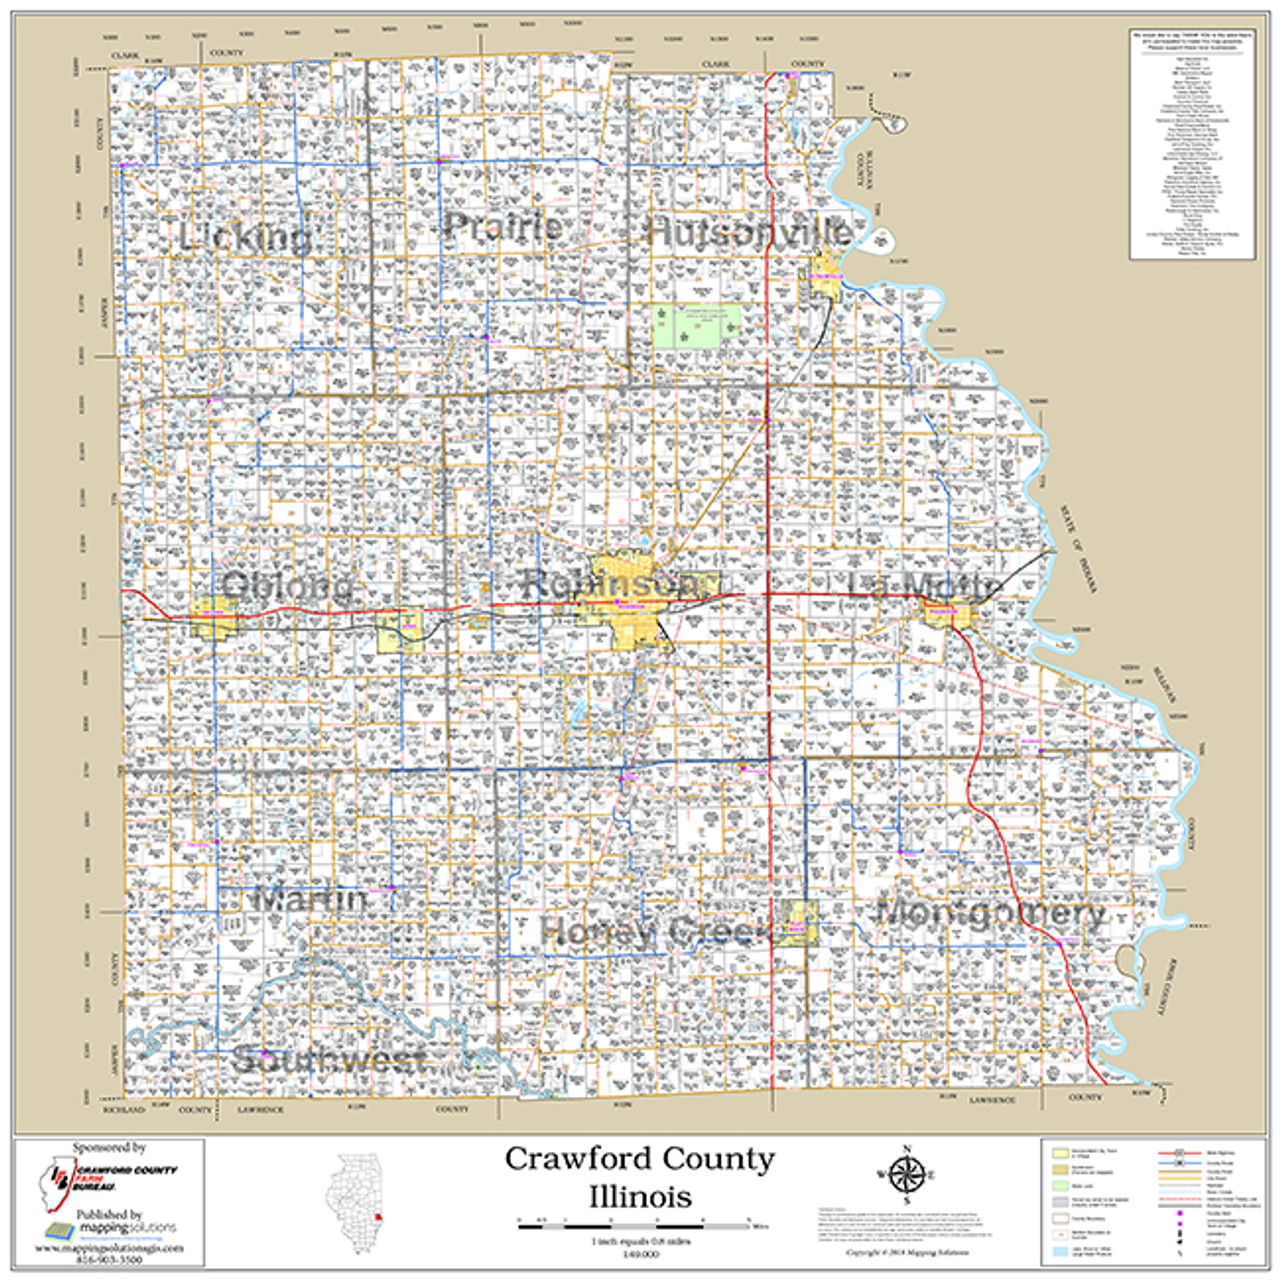 crawford county gis mapping Crawford County Illinois 2018 Wall Map Crawford County Illinois 2018 Plat Book Crawford County Illinois Plat Map Plat Book Gis Parcel Data Property Lines Map Aerial Imagery Parcel Plat Maps For